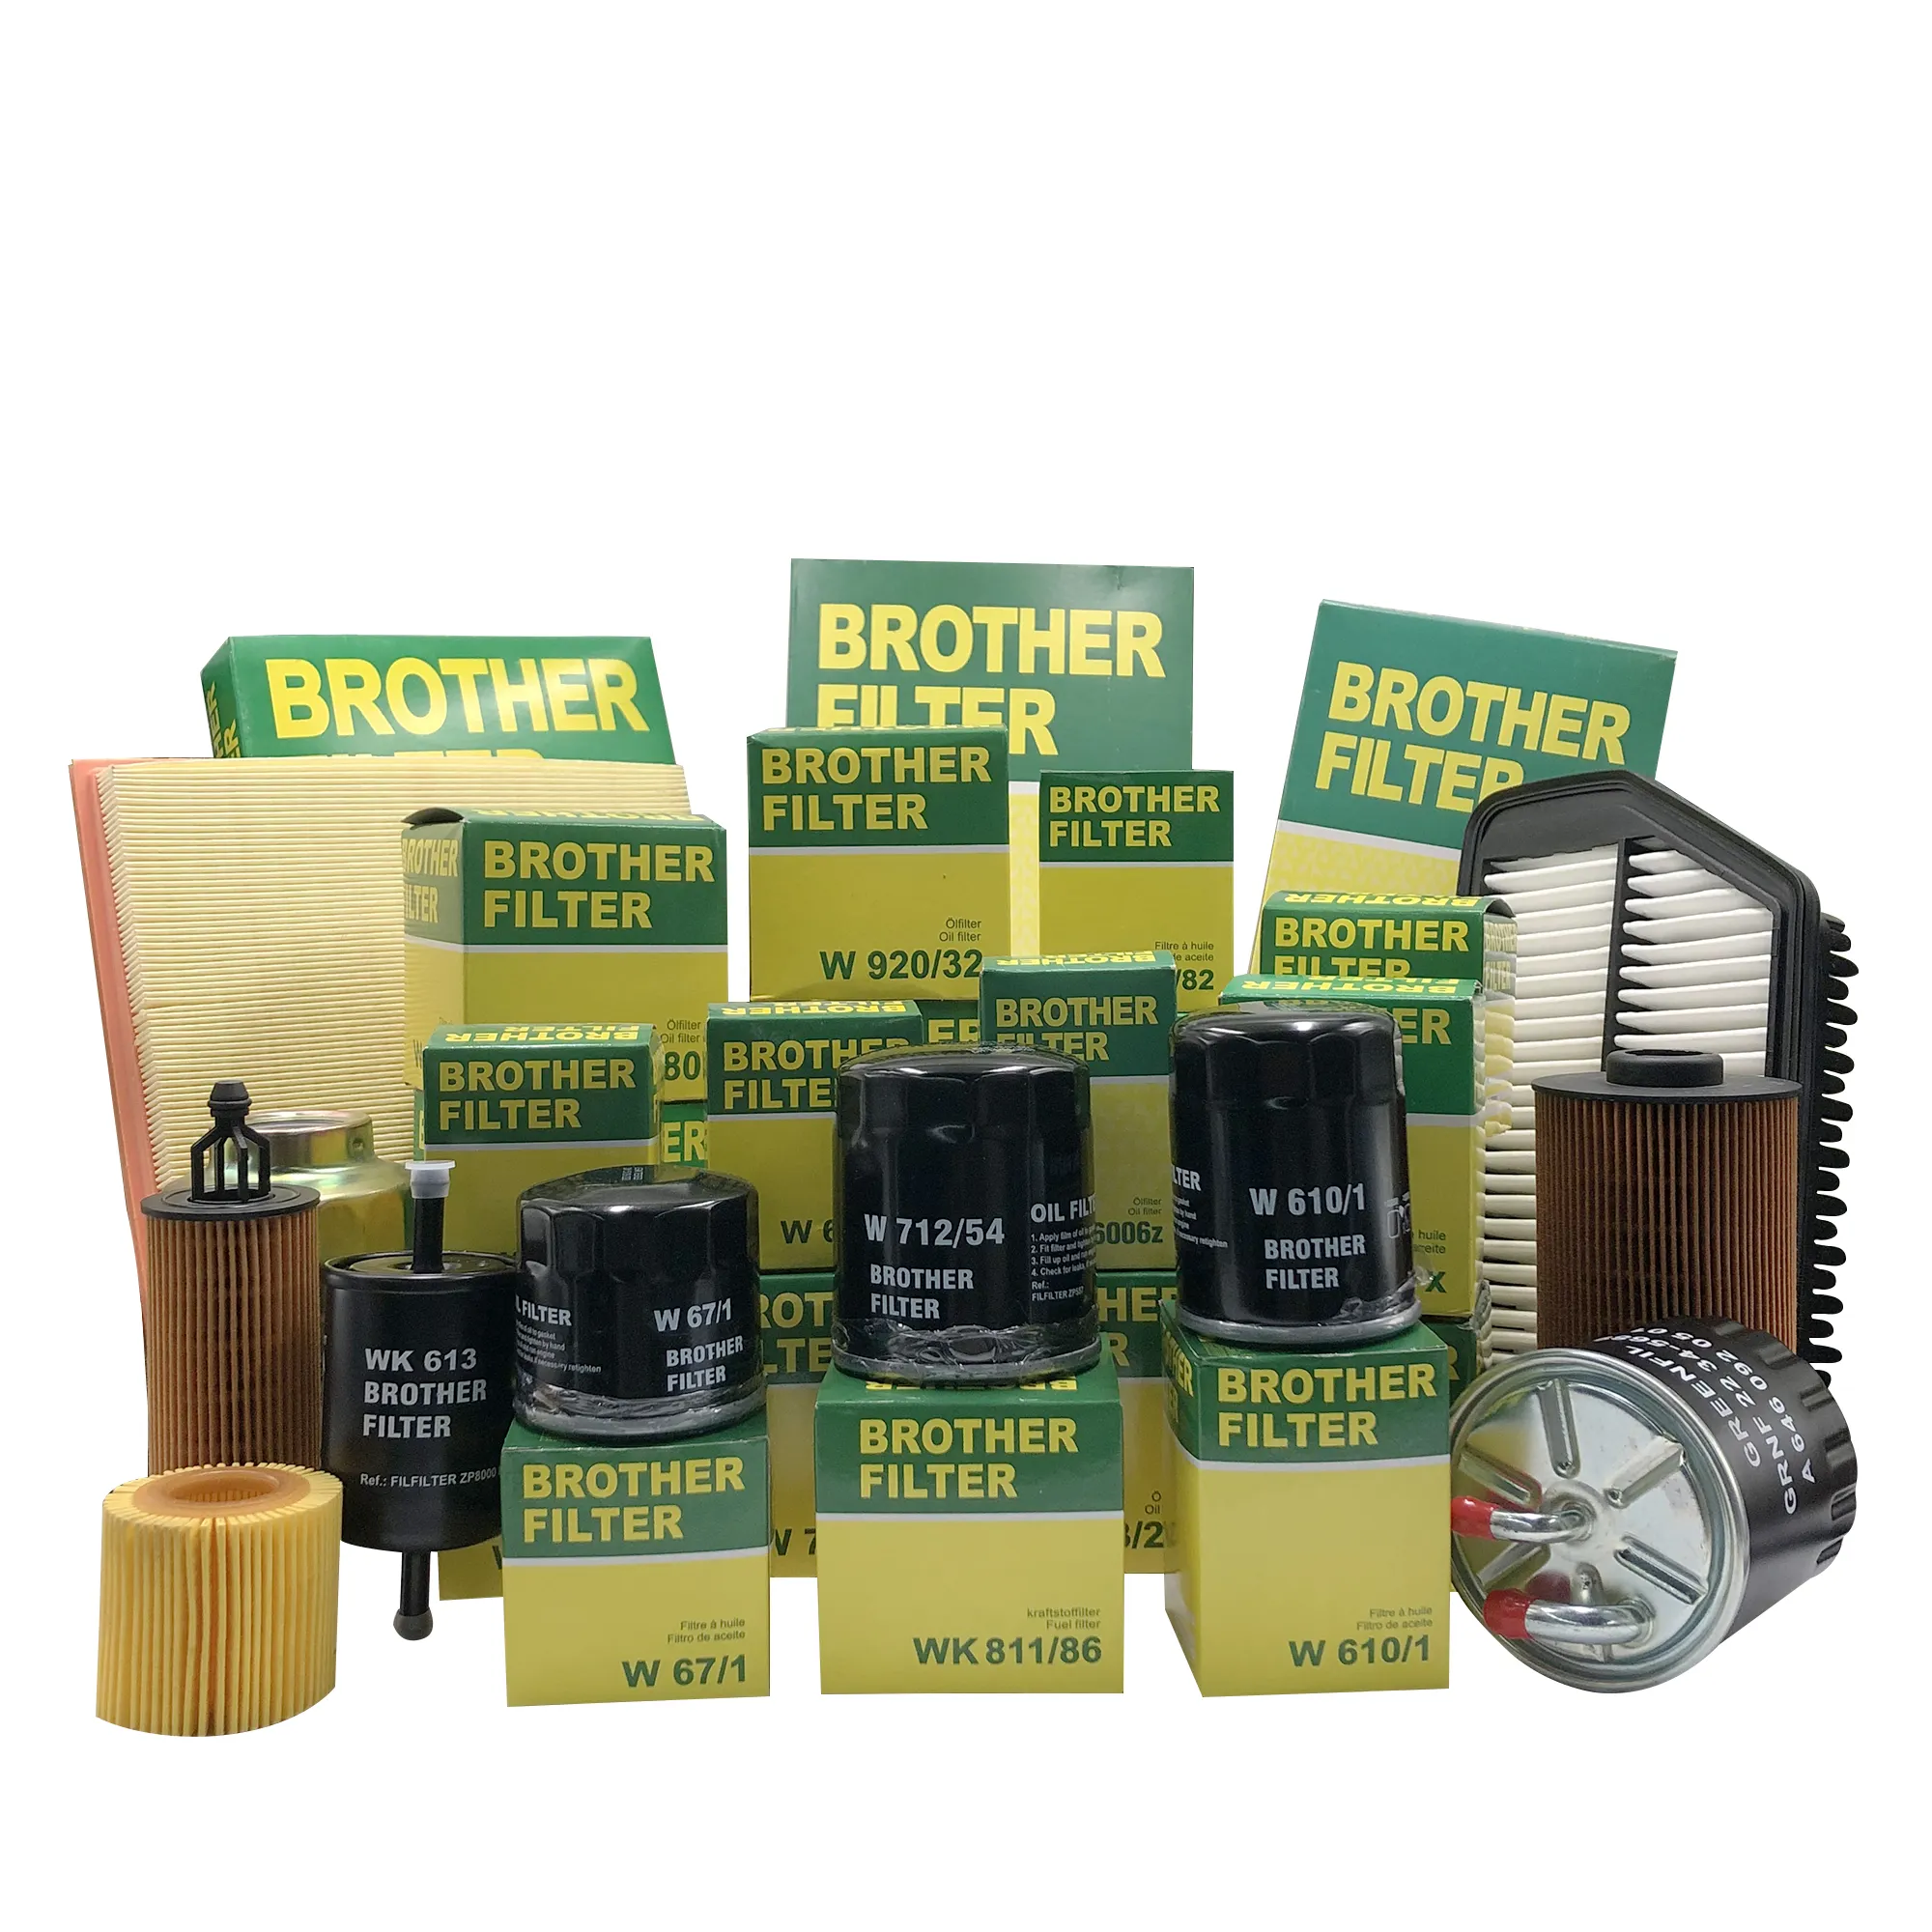 BRO Factory Auto Parts Car Oil Filter MD069982 B6YO-14-302 High Quality plate and frame Oil filters C307J